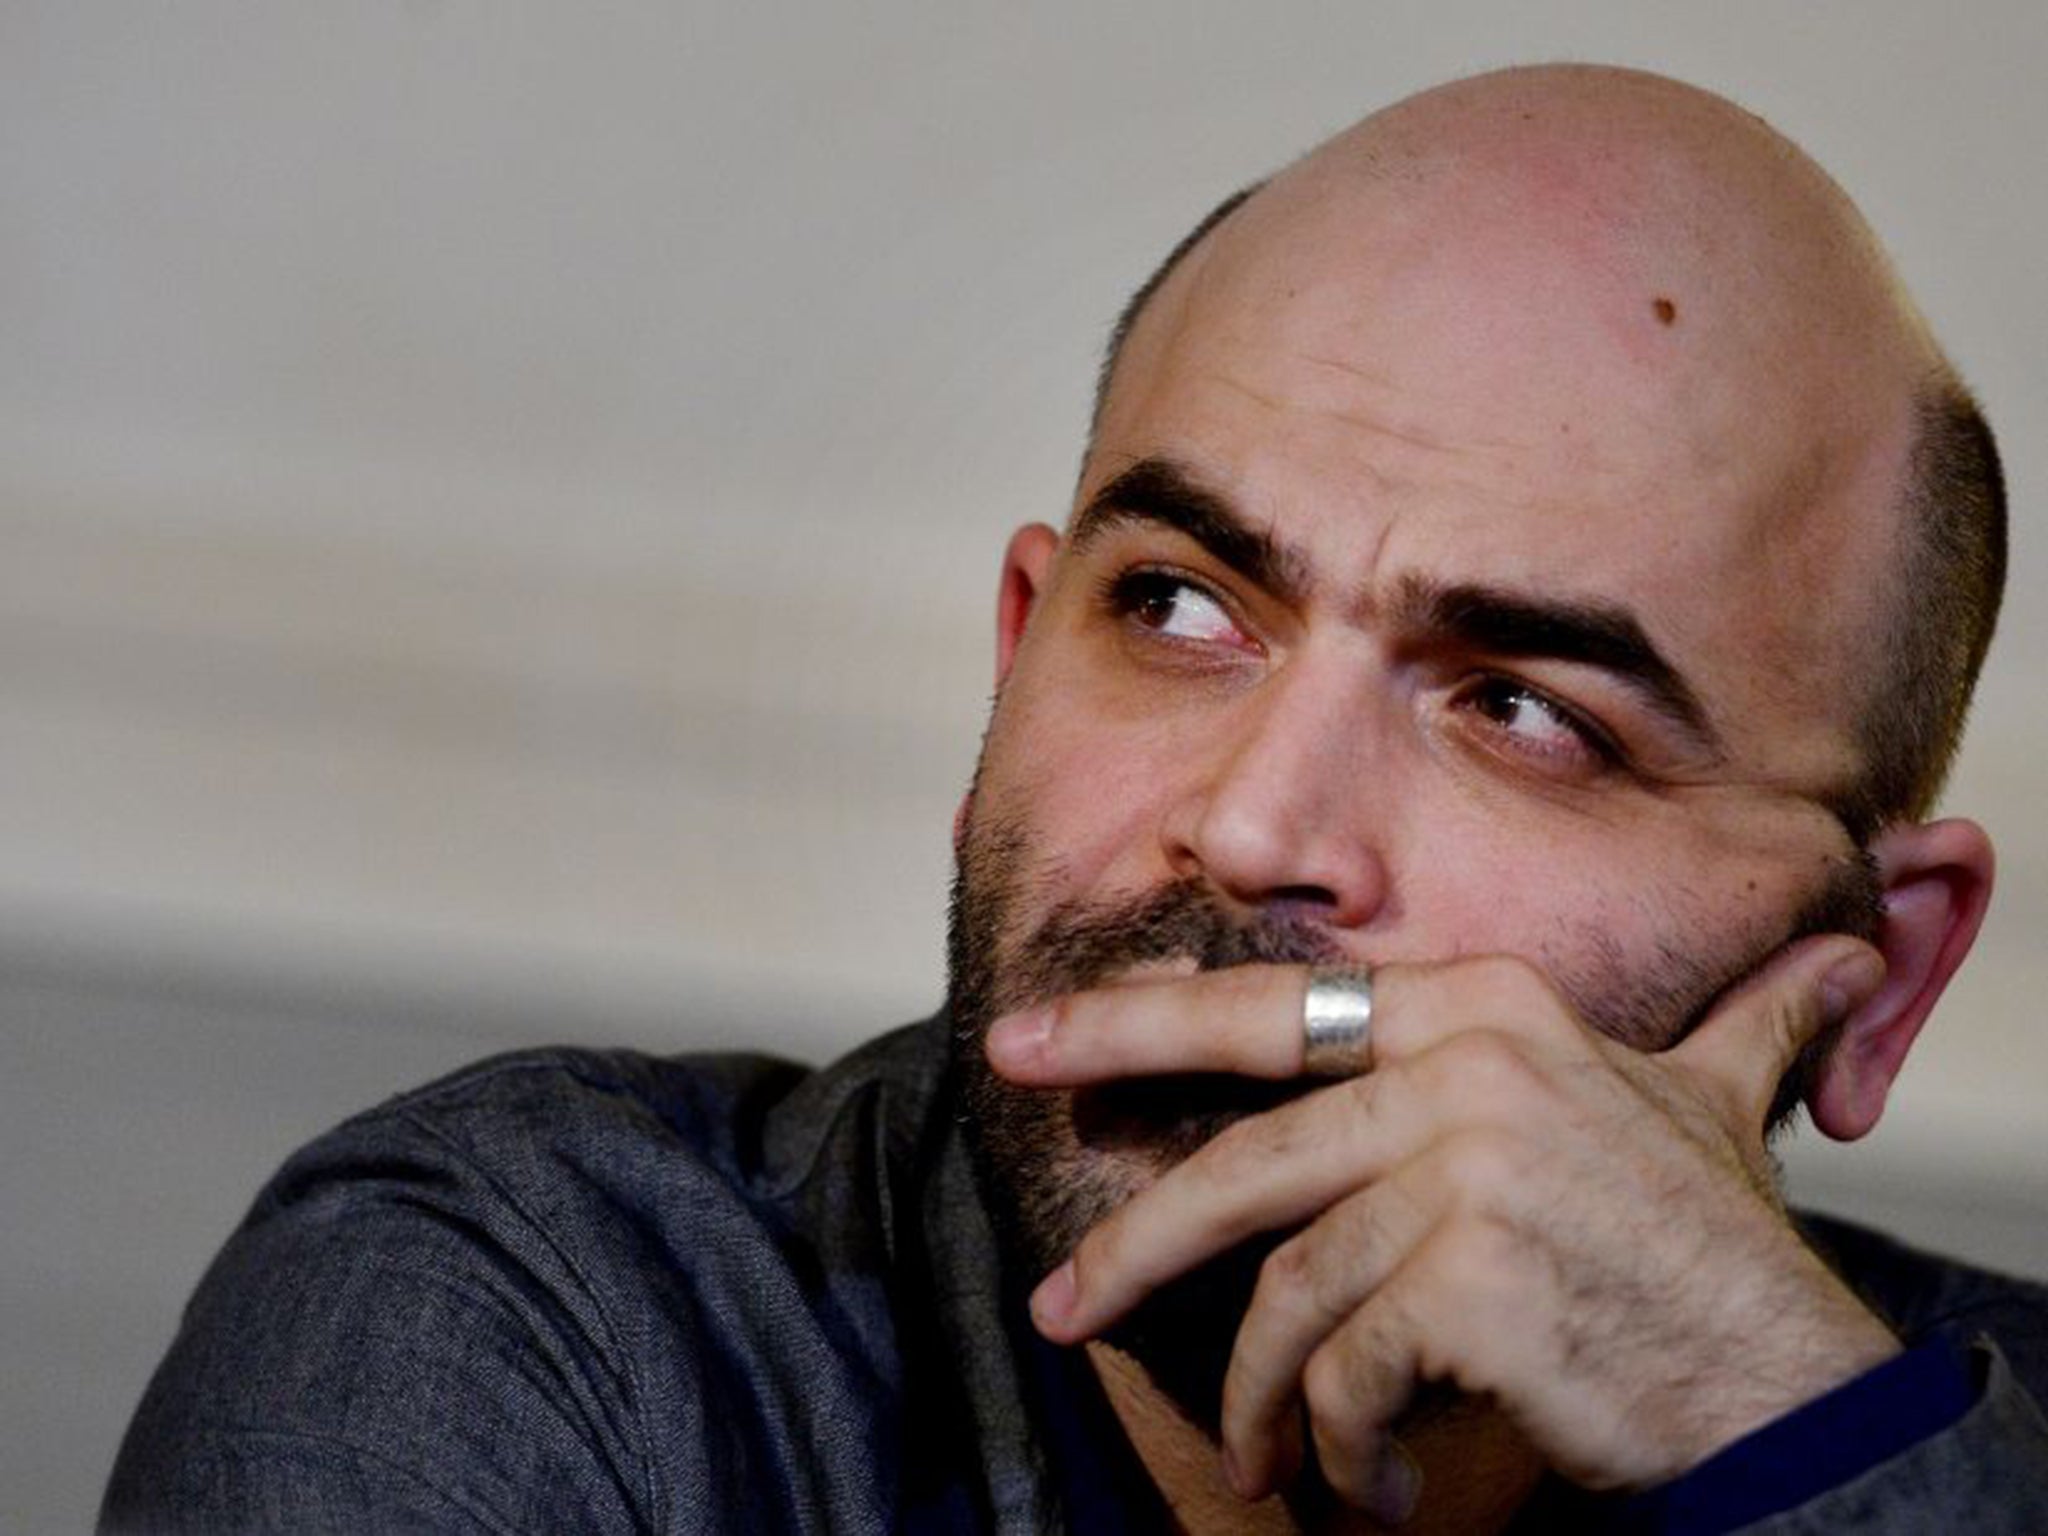 Roberto Saviano, the author of the highly acclaimed book 'Gomorrah' about Naples’s equivalent of the Mafia (